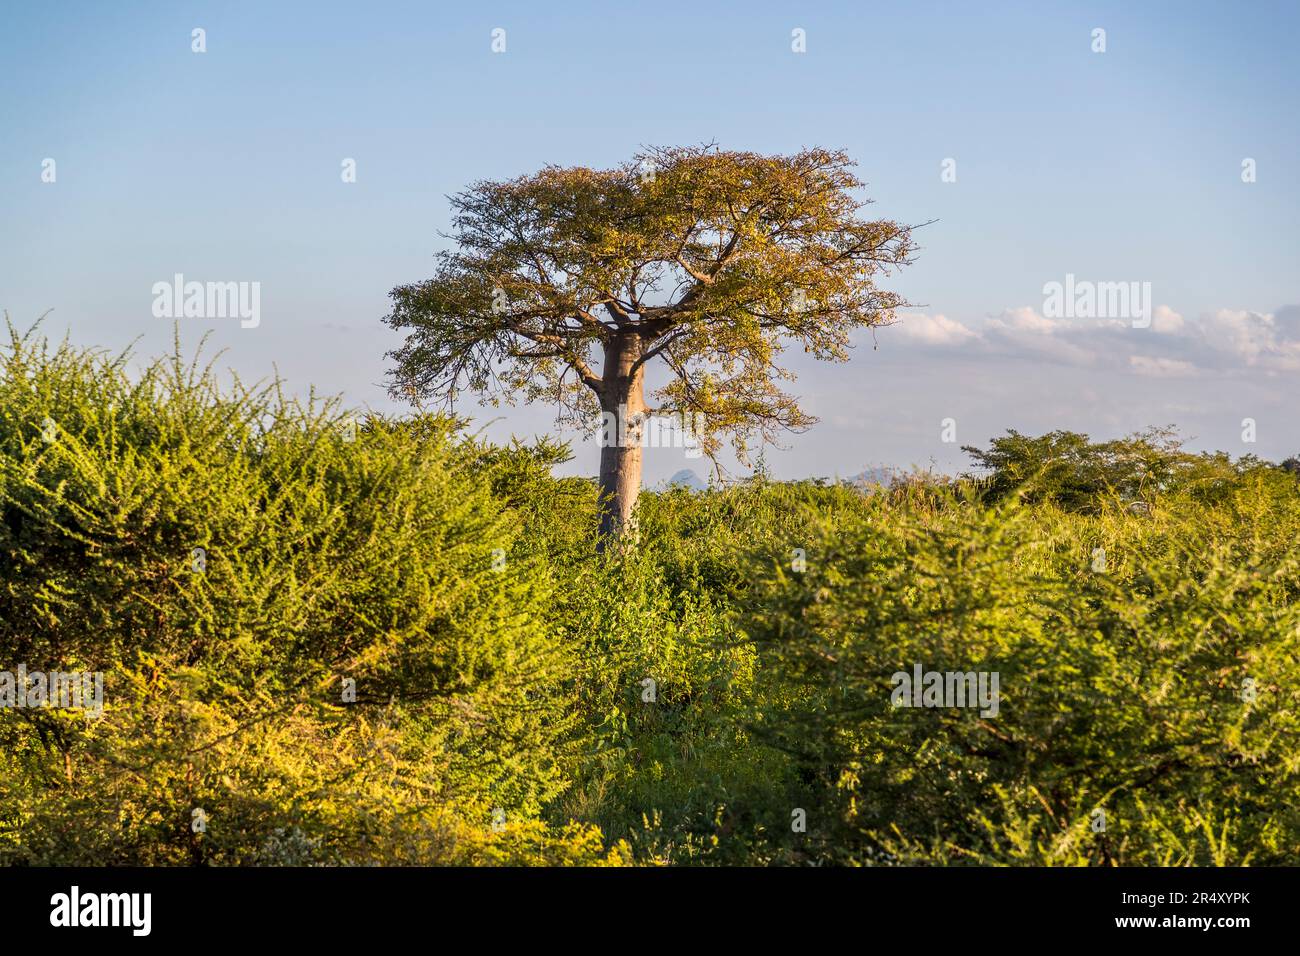 Baobob tree in Malawi. According to legend, even the gods were jealous of the size of these trees, whereupon they uprooted them and planted them the wrong way round. Stock Photo